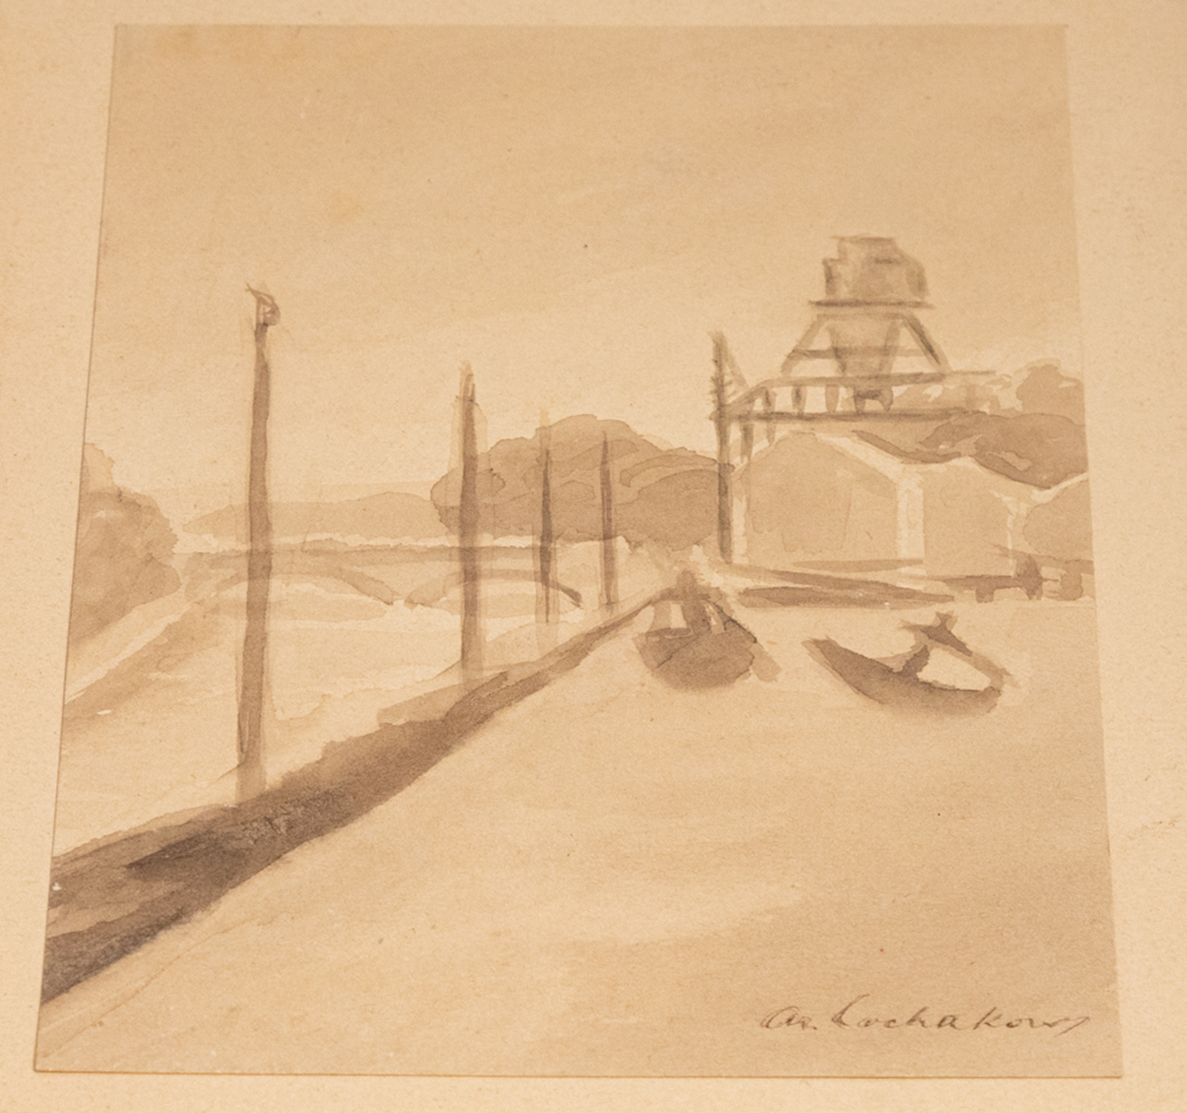 A sepia-toned watercolor sketch of a street, buildings, boats, and poles with a signature at the bottom right.